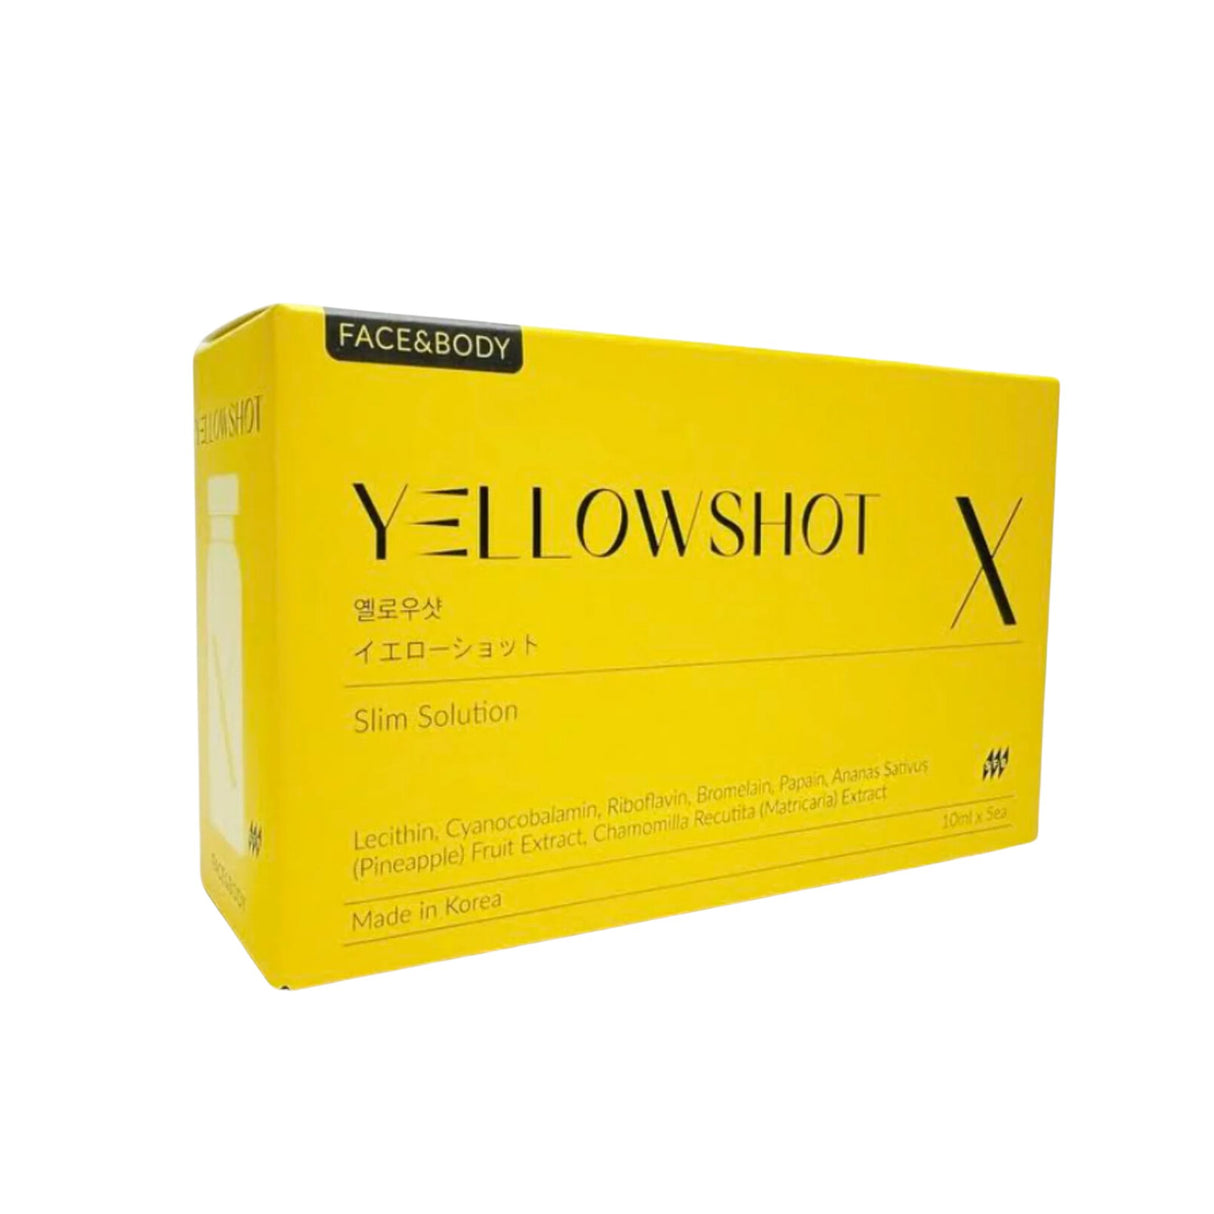 Yellow Shot Slimming Solution - Filler Lux™ - Lipolytic - Filler Lux™